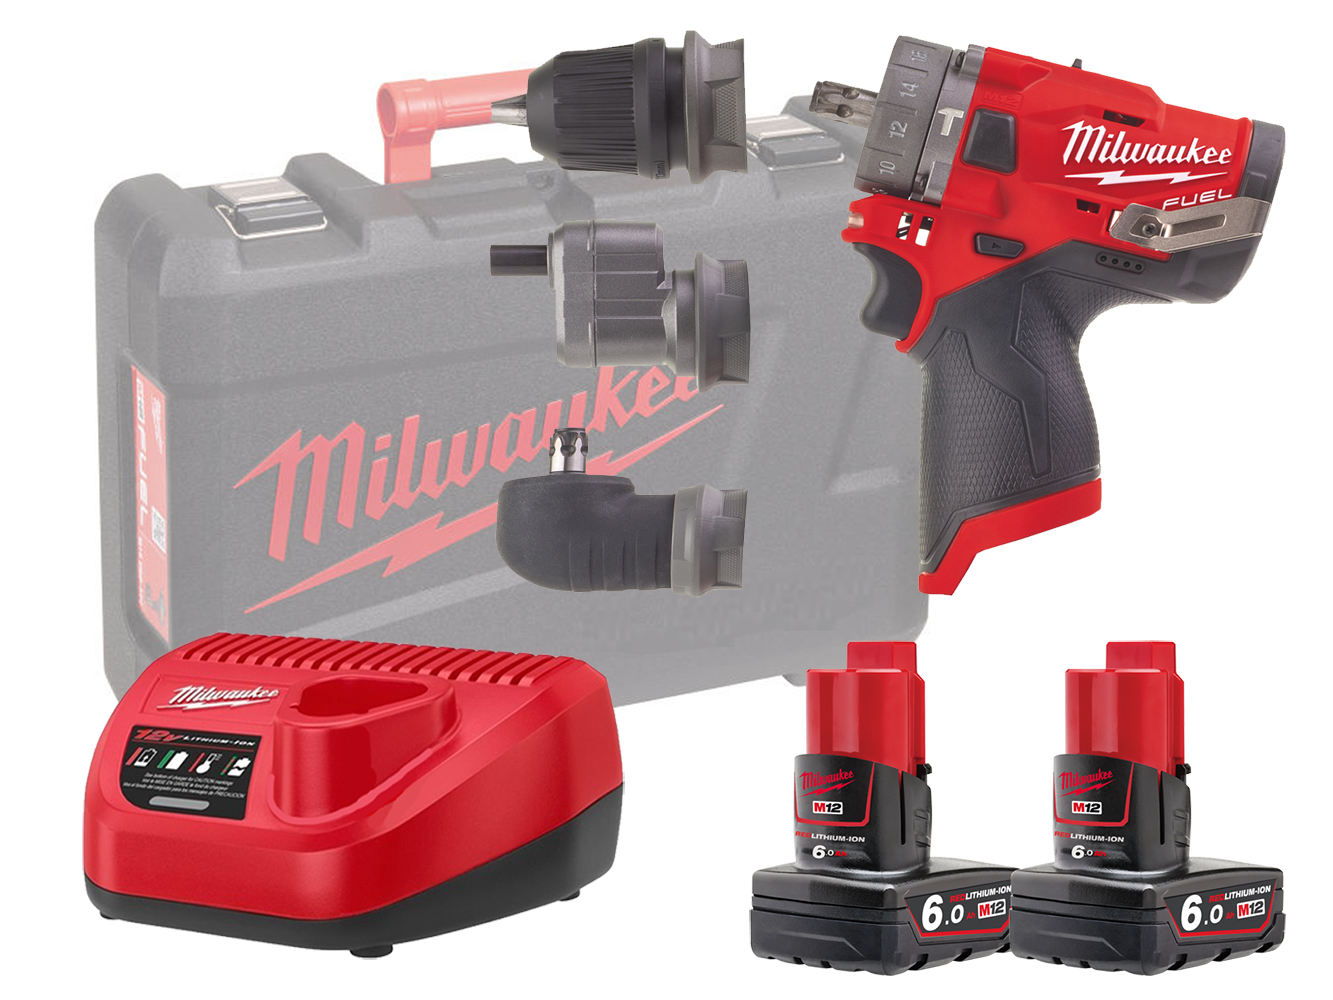 Milwaukee M12FPDX 12V Fuel Sub Compact Percussion Drill (Combi Drill) With Removable Chuck - 6.0Ah Pack